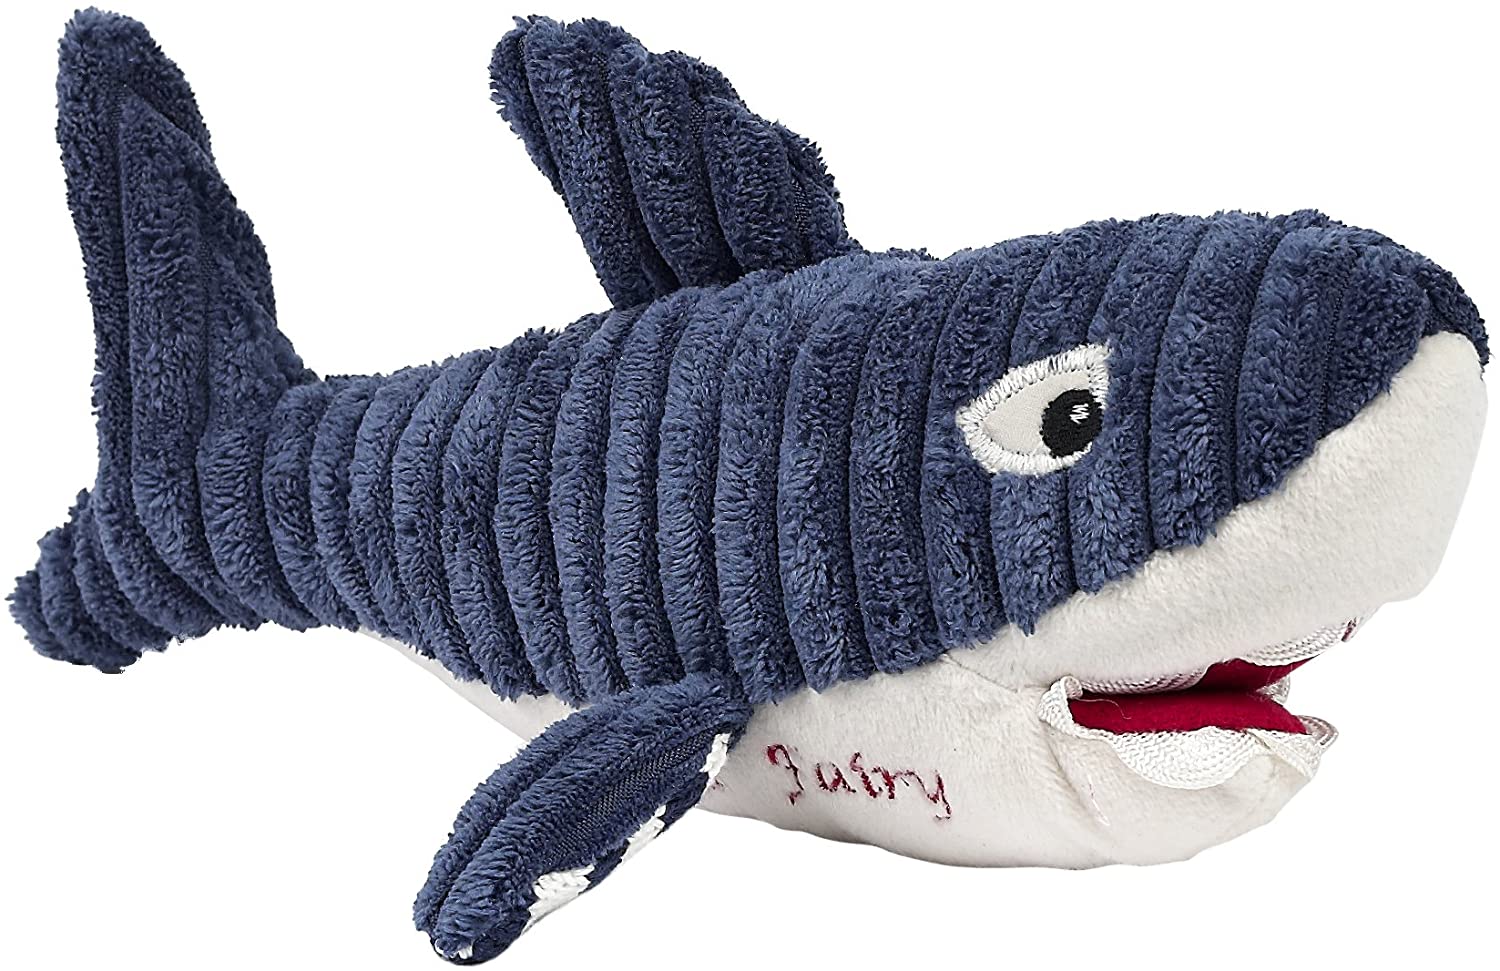 bruce the shark tooth fairy plush animal on a white background